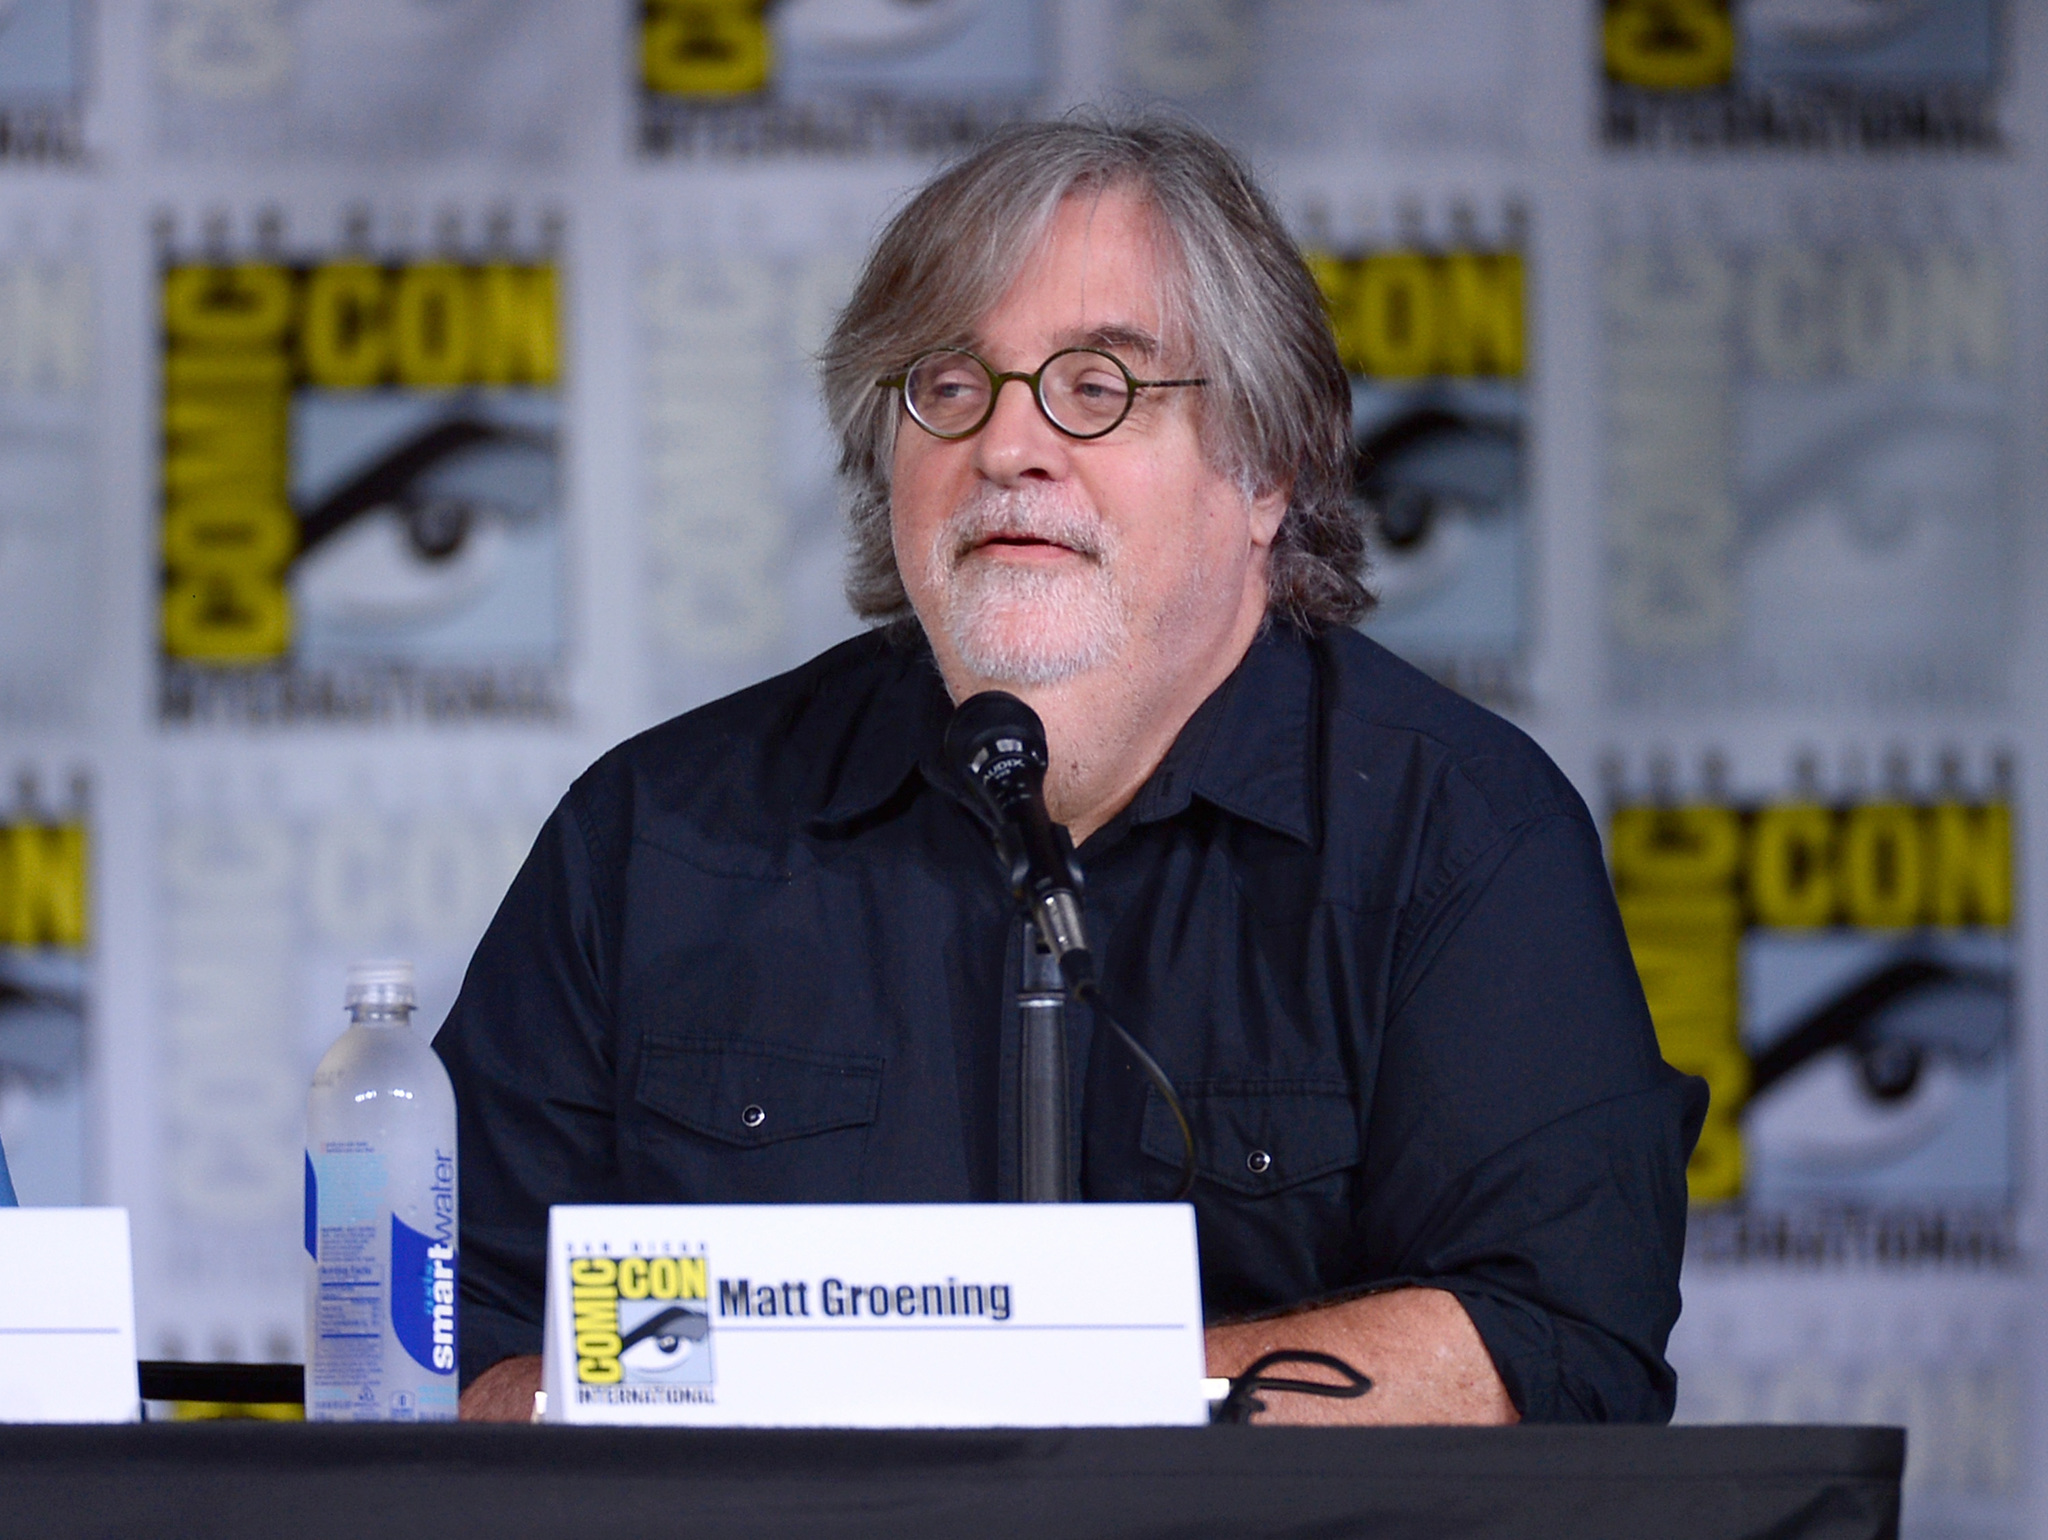 Maatt Groening wearing a black polo with mic in front of him at Comic con